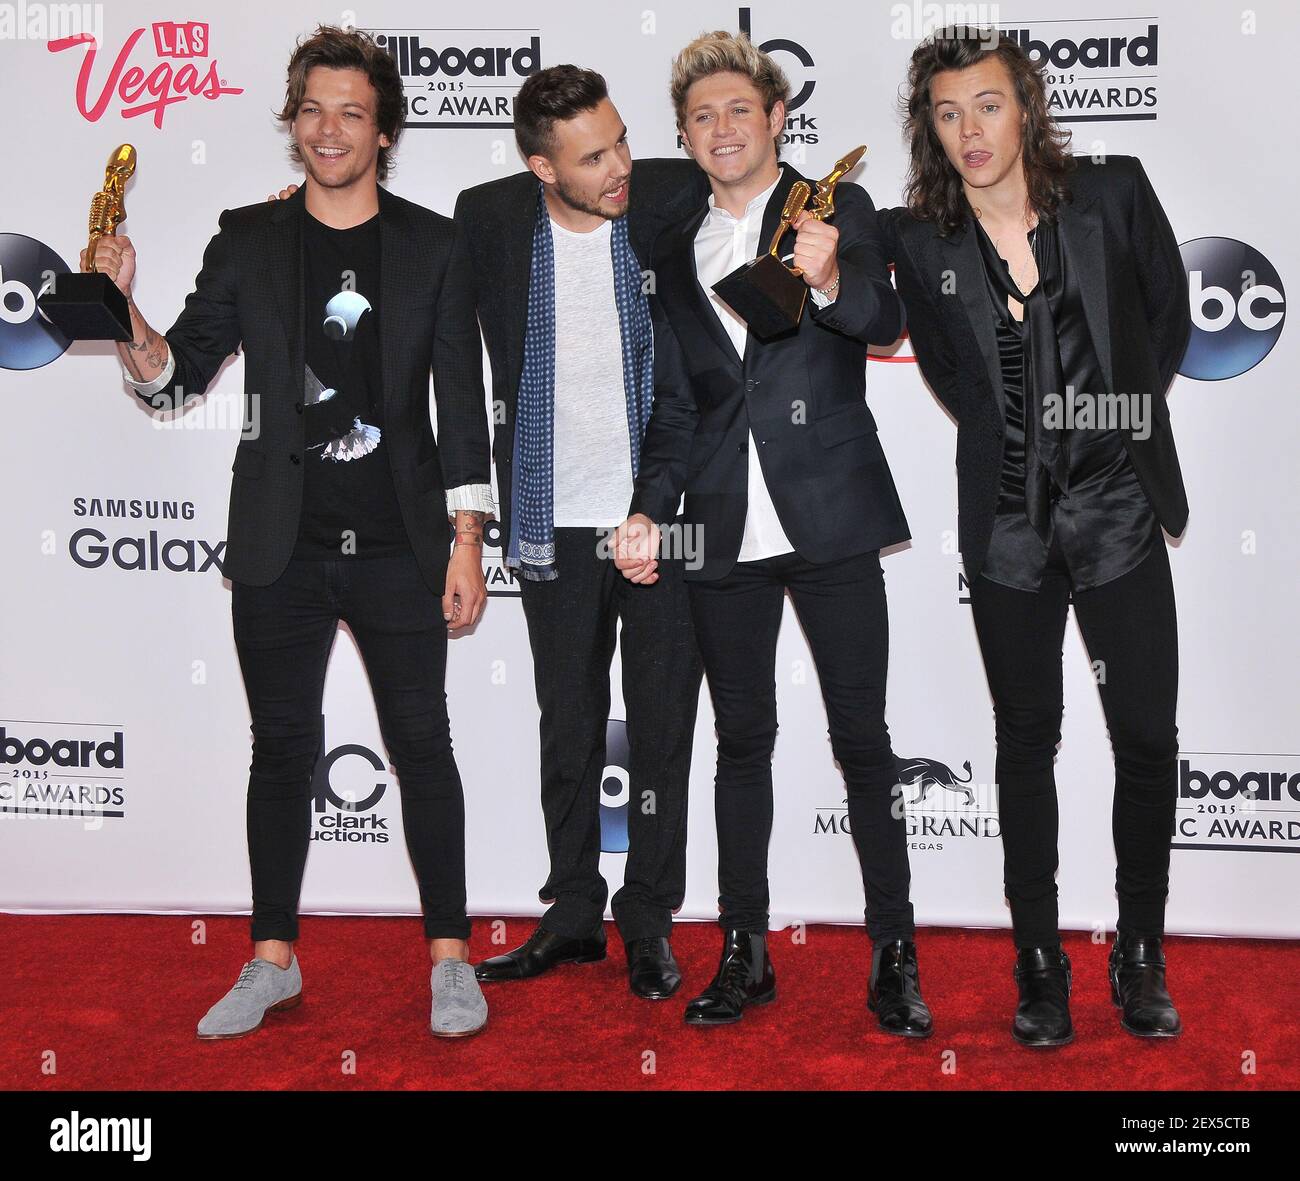 L-R) One Direction - Louis Tomlinson, Liam Payne, Niall Horan and Harry  Styles, Winners of Top Duo/Group and Top Touring Artists Awards at the 2015  Billboard Music Awards - Press Room held